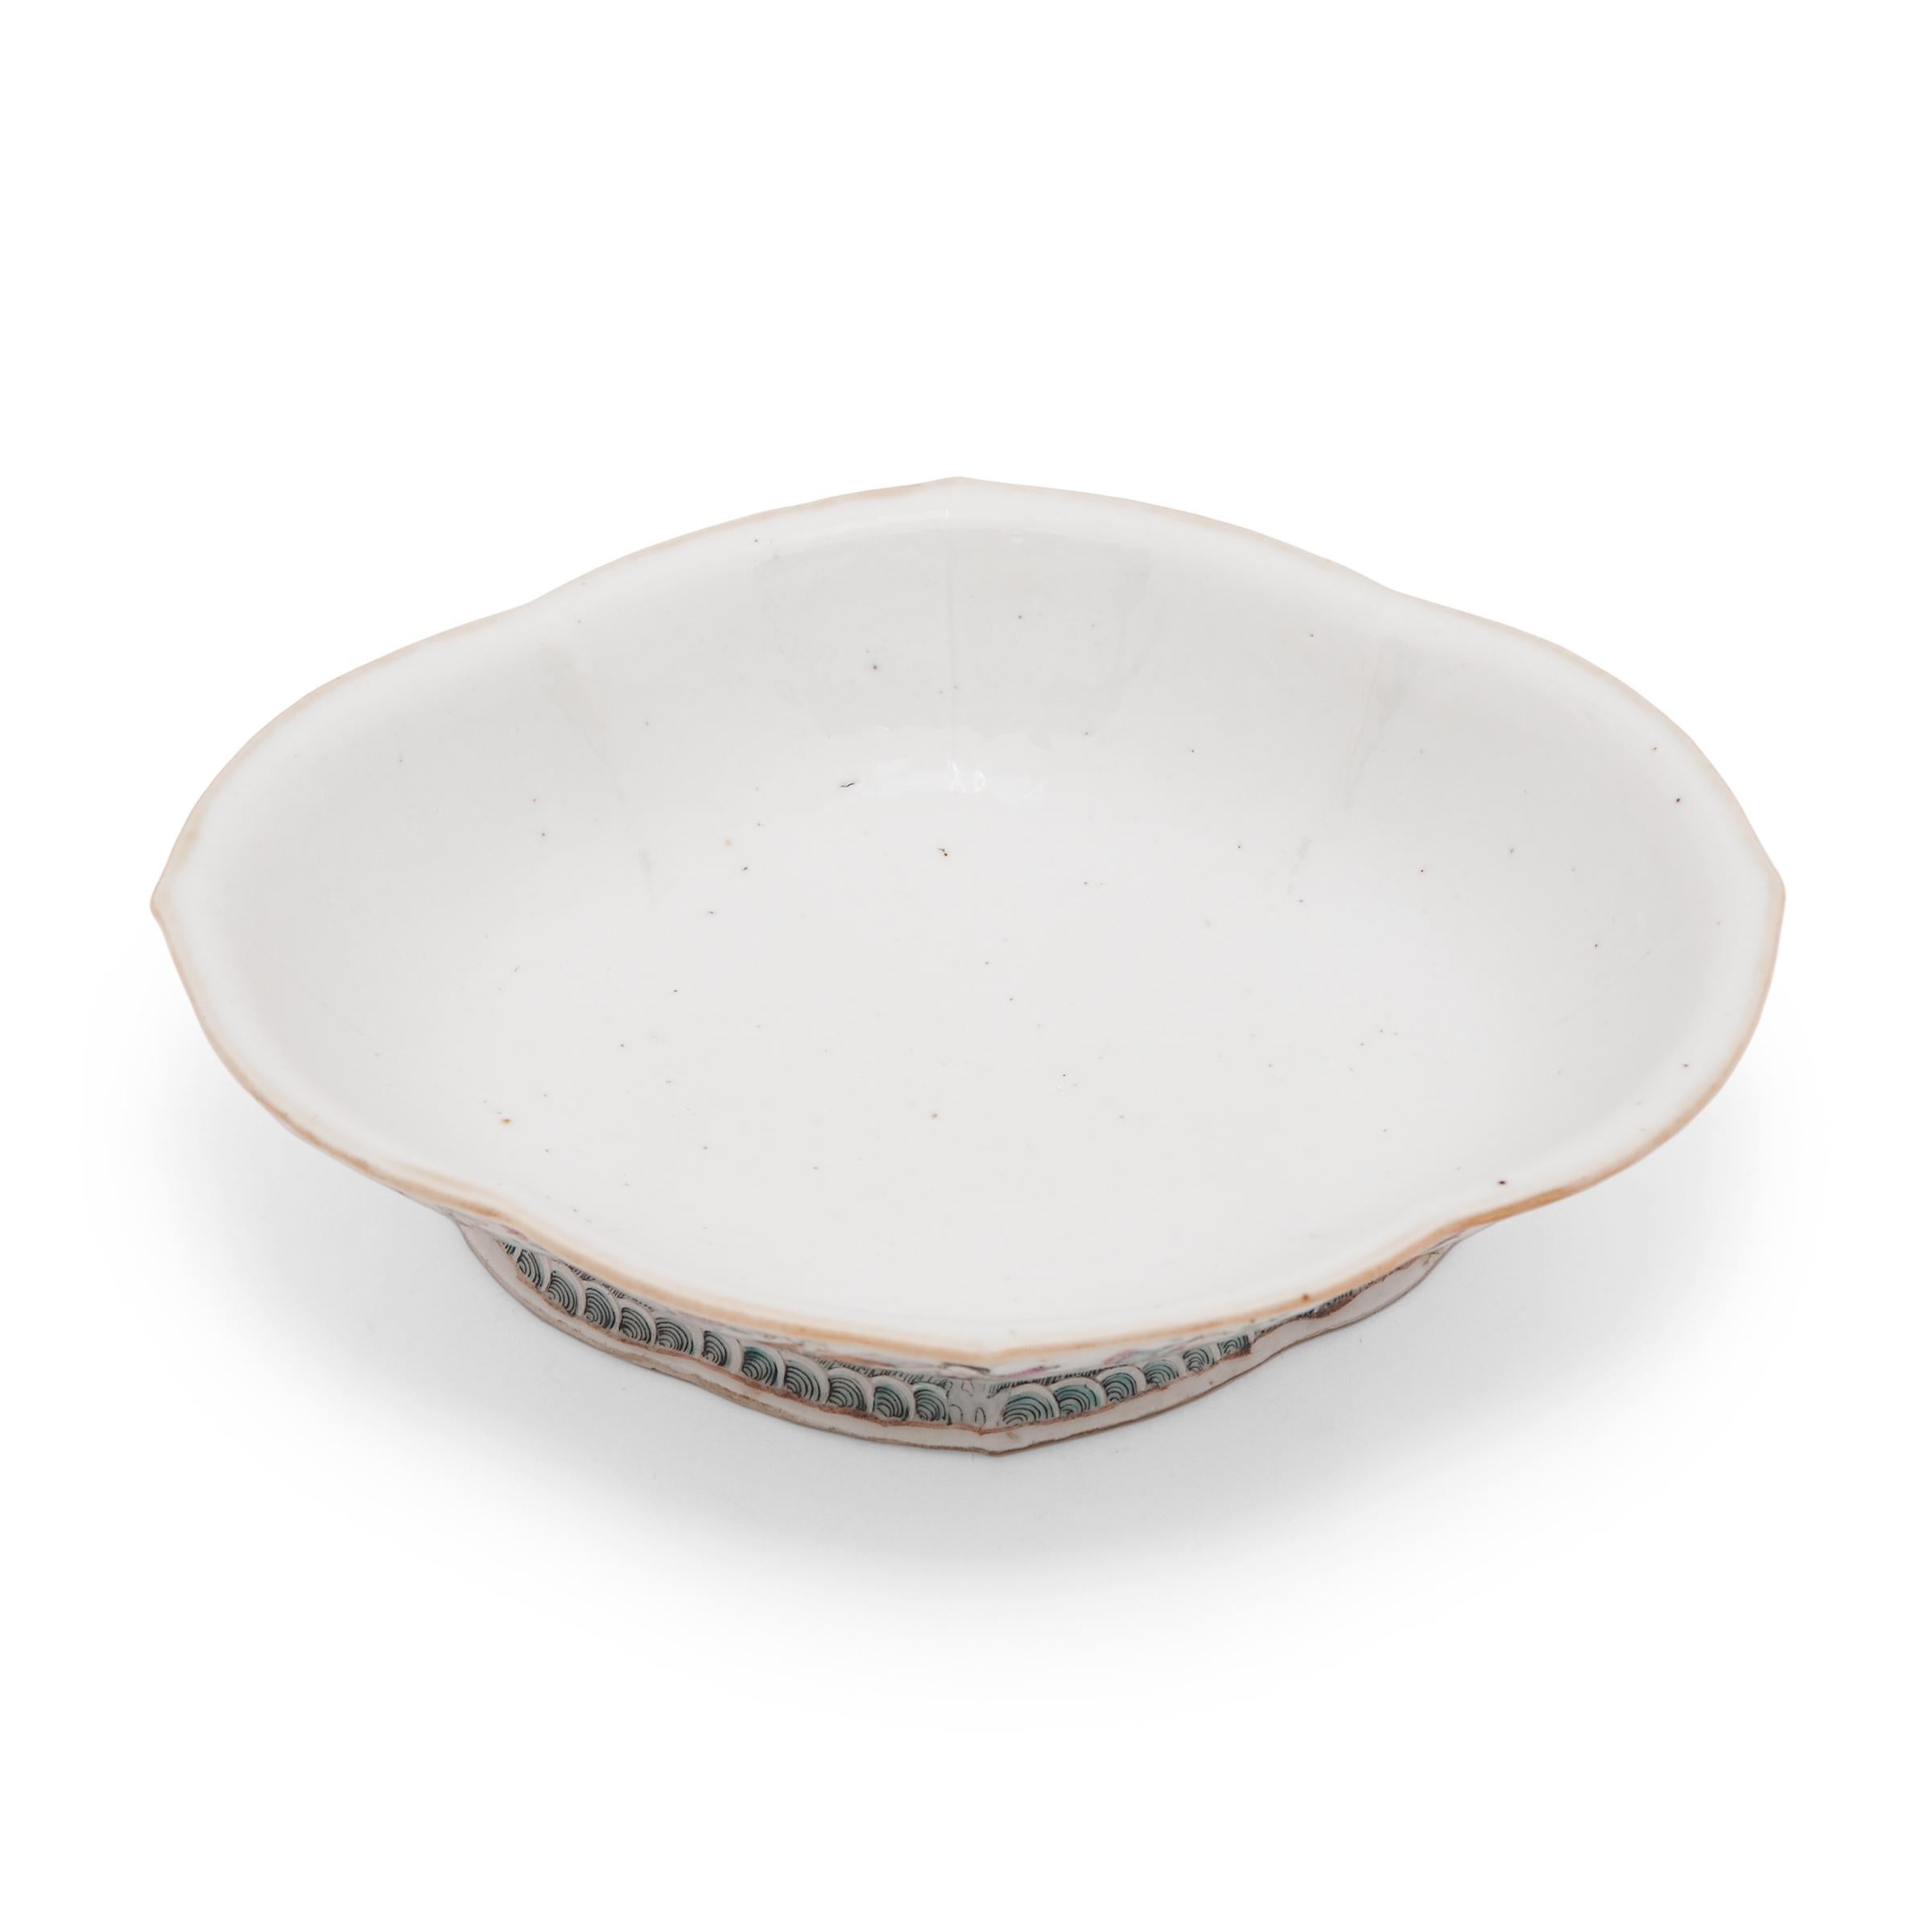 19th Century Chinese Famille Rose Footed Offering Bowl, c. 1850